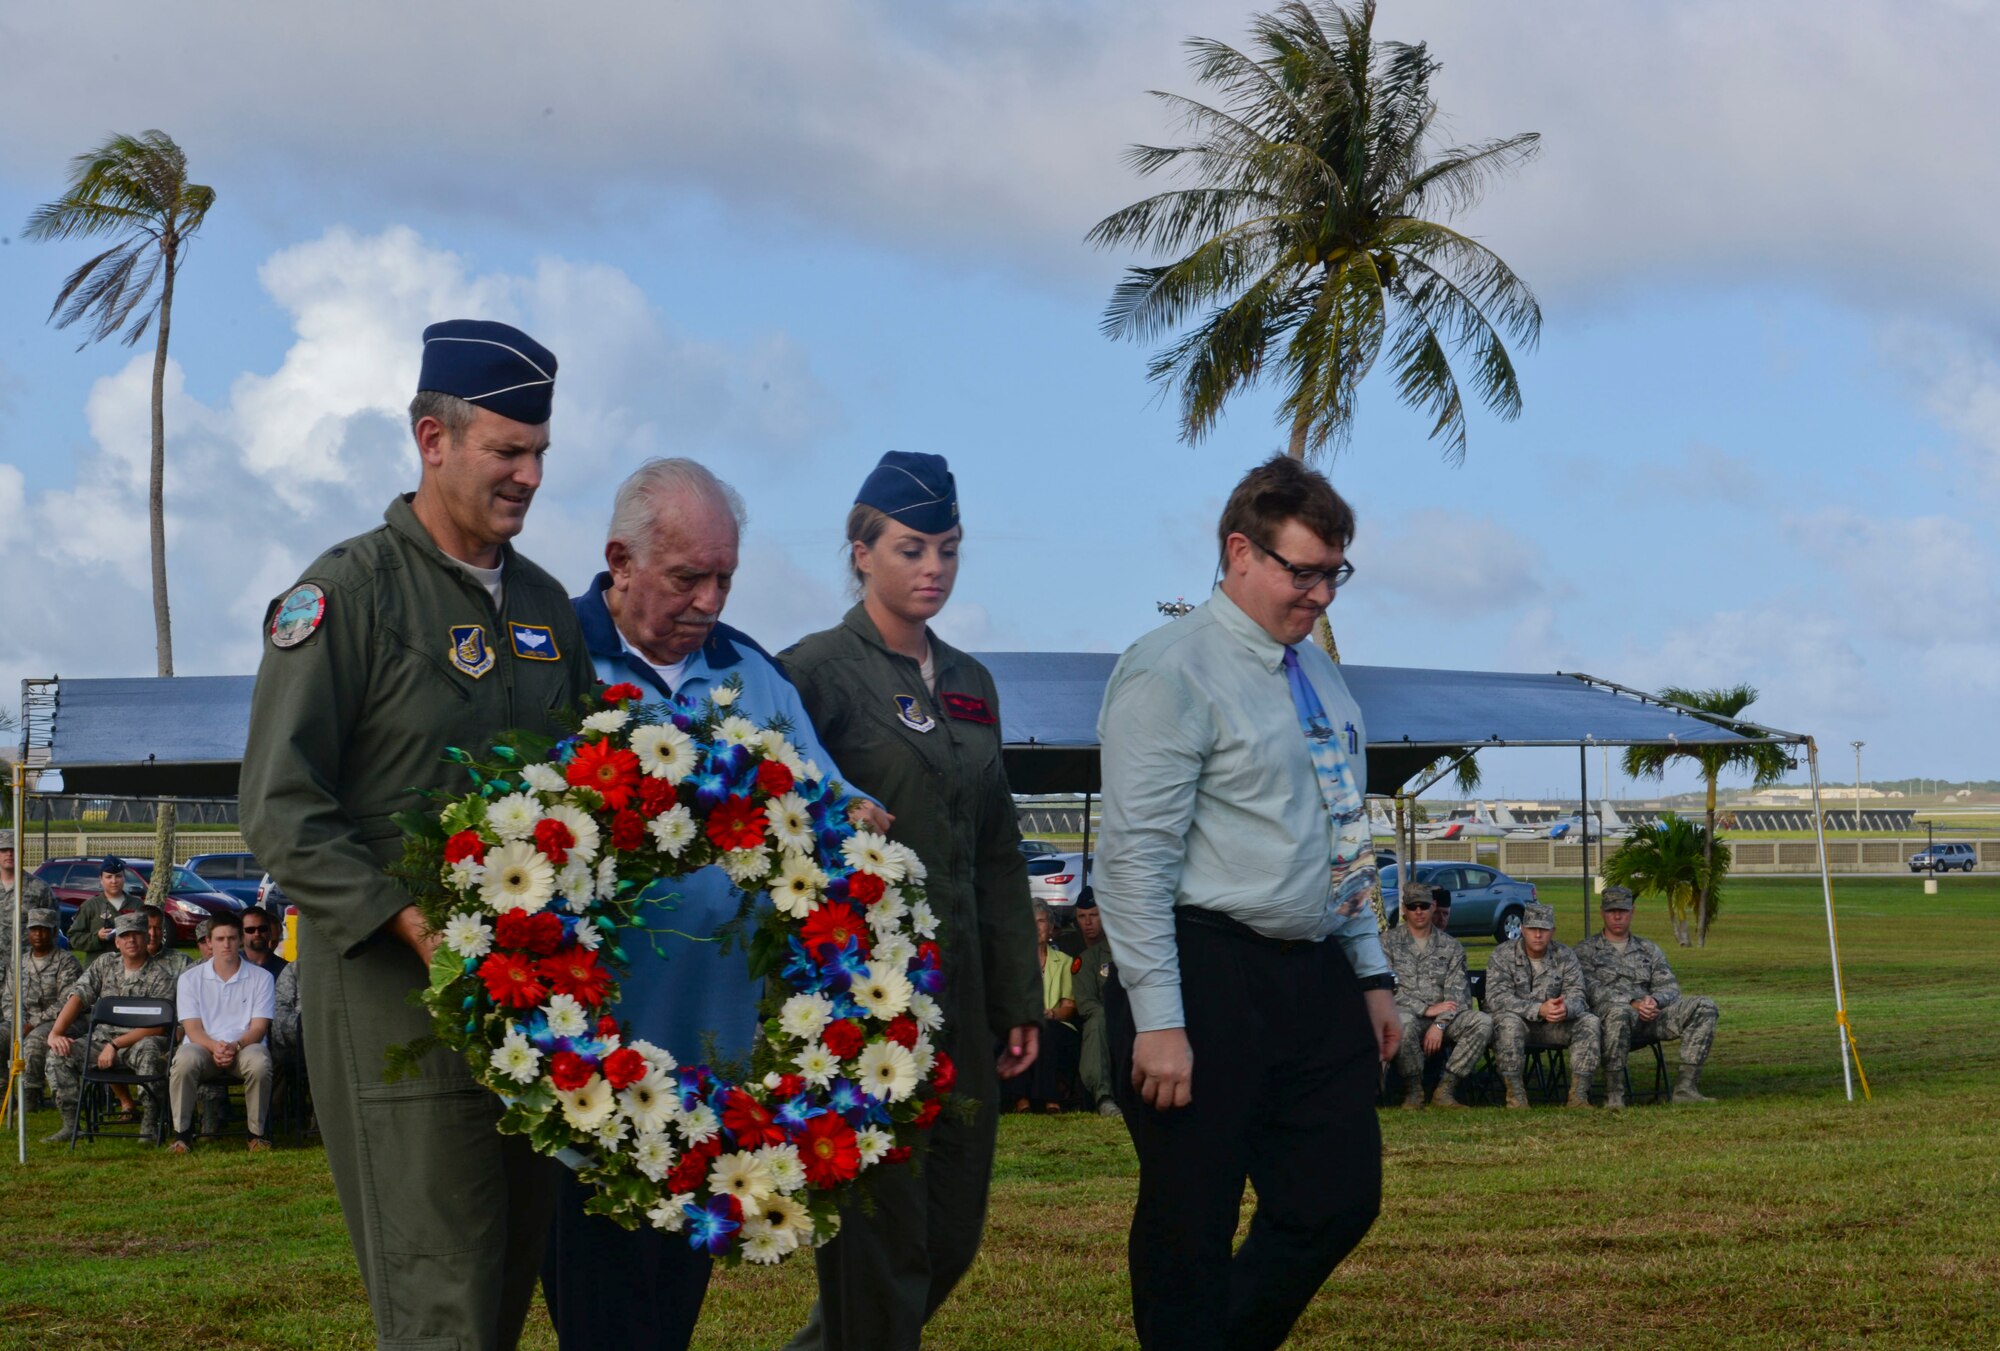 Brig. Gen. Andrew Toth, 36th Wing commander and Lt. Col. (ret.) Chuck McManus along with other Team Andersen members lays the ceremonial wreath during the Operation Linebacker II Remembrance Ceremony Dec. 18, 2014, at Andersen Air Force Base, Guam. McManus was a B-52 pilot stationed at Andersen during the operation. (U.S. Air Force photo by Staff Sgt. Robert Hicks/Released)  